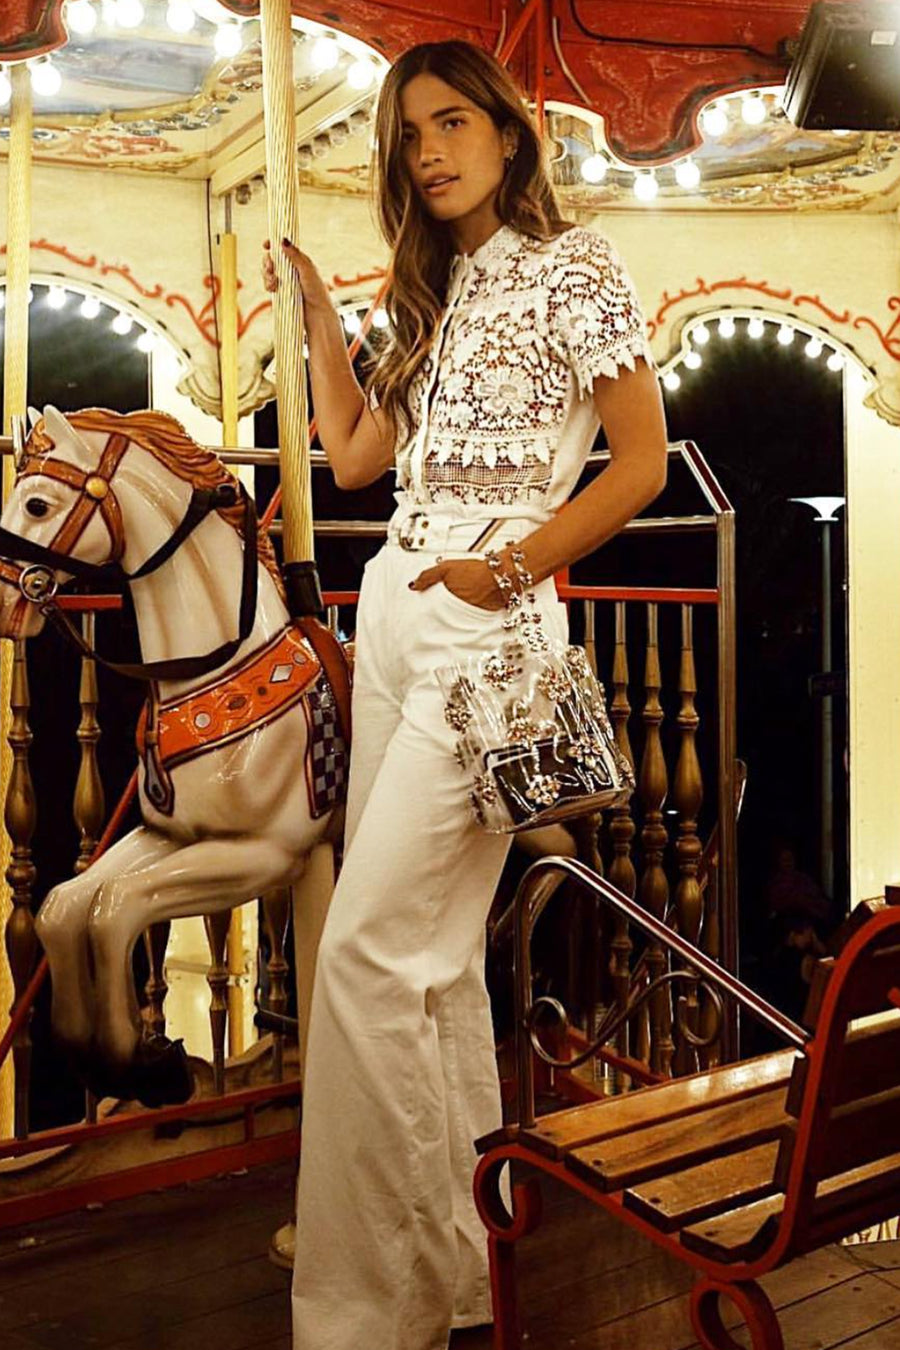 This is a photo of a woman. She is wearing a button front, lace tired blouse tucked into a pair of white, flare leg pants. She has her hand in the left side pocket of the pants.